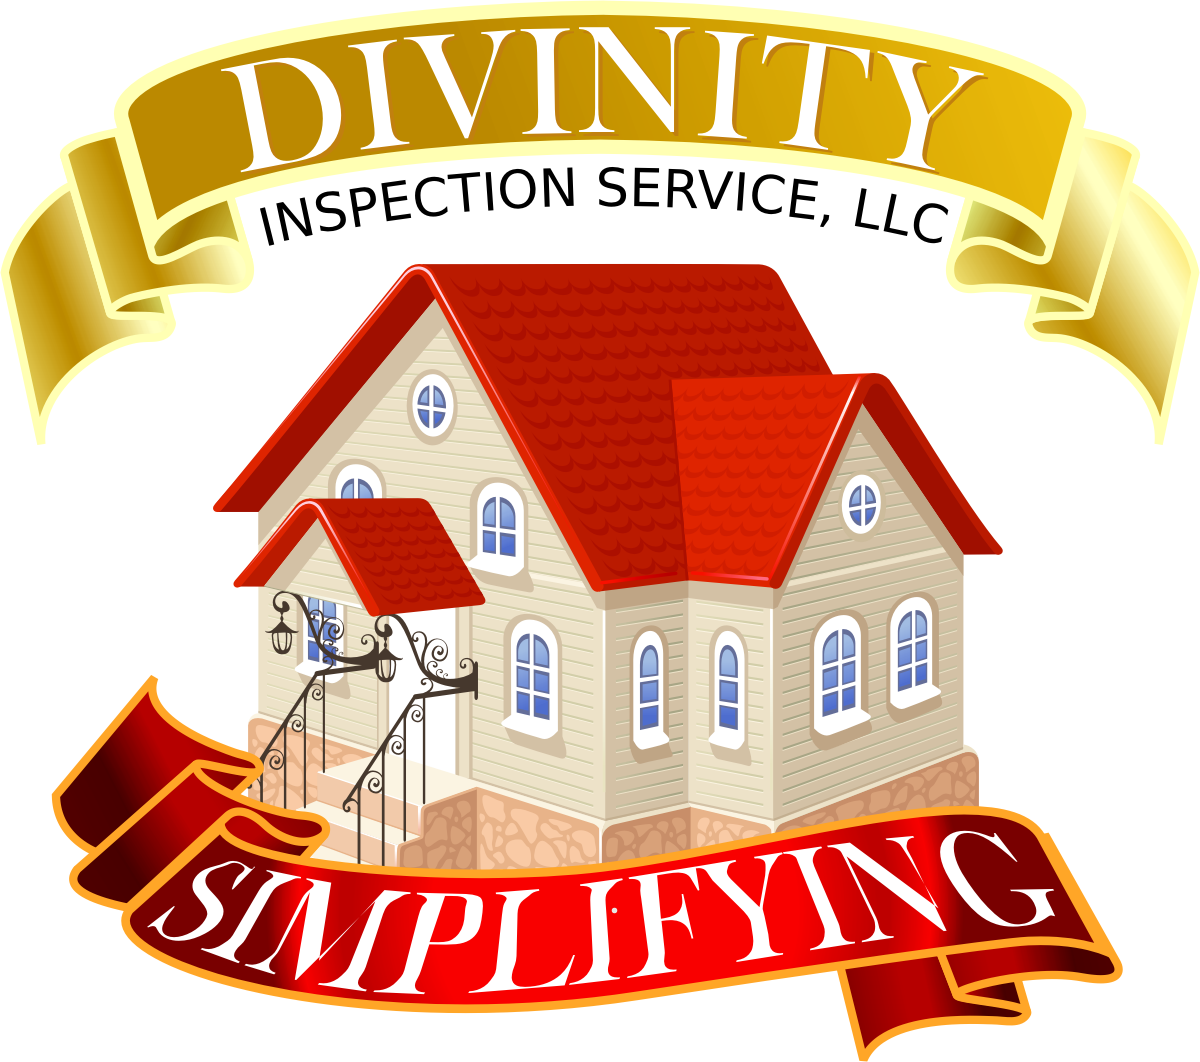 Divinity Inspection Service